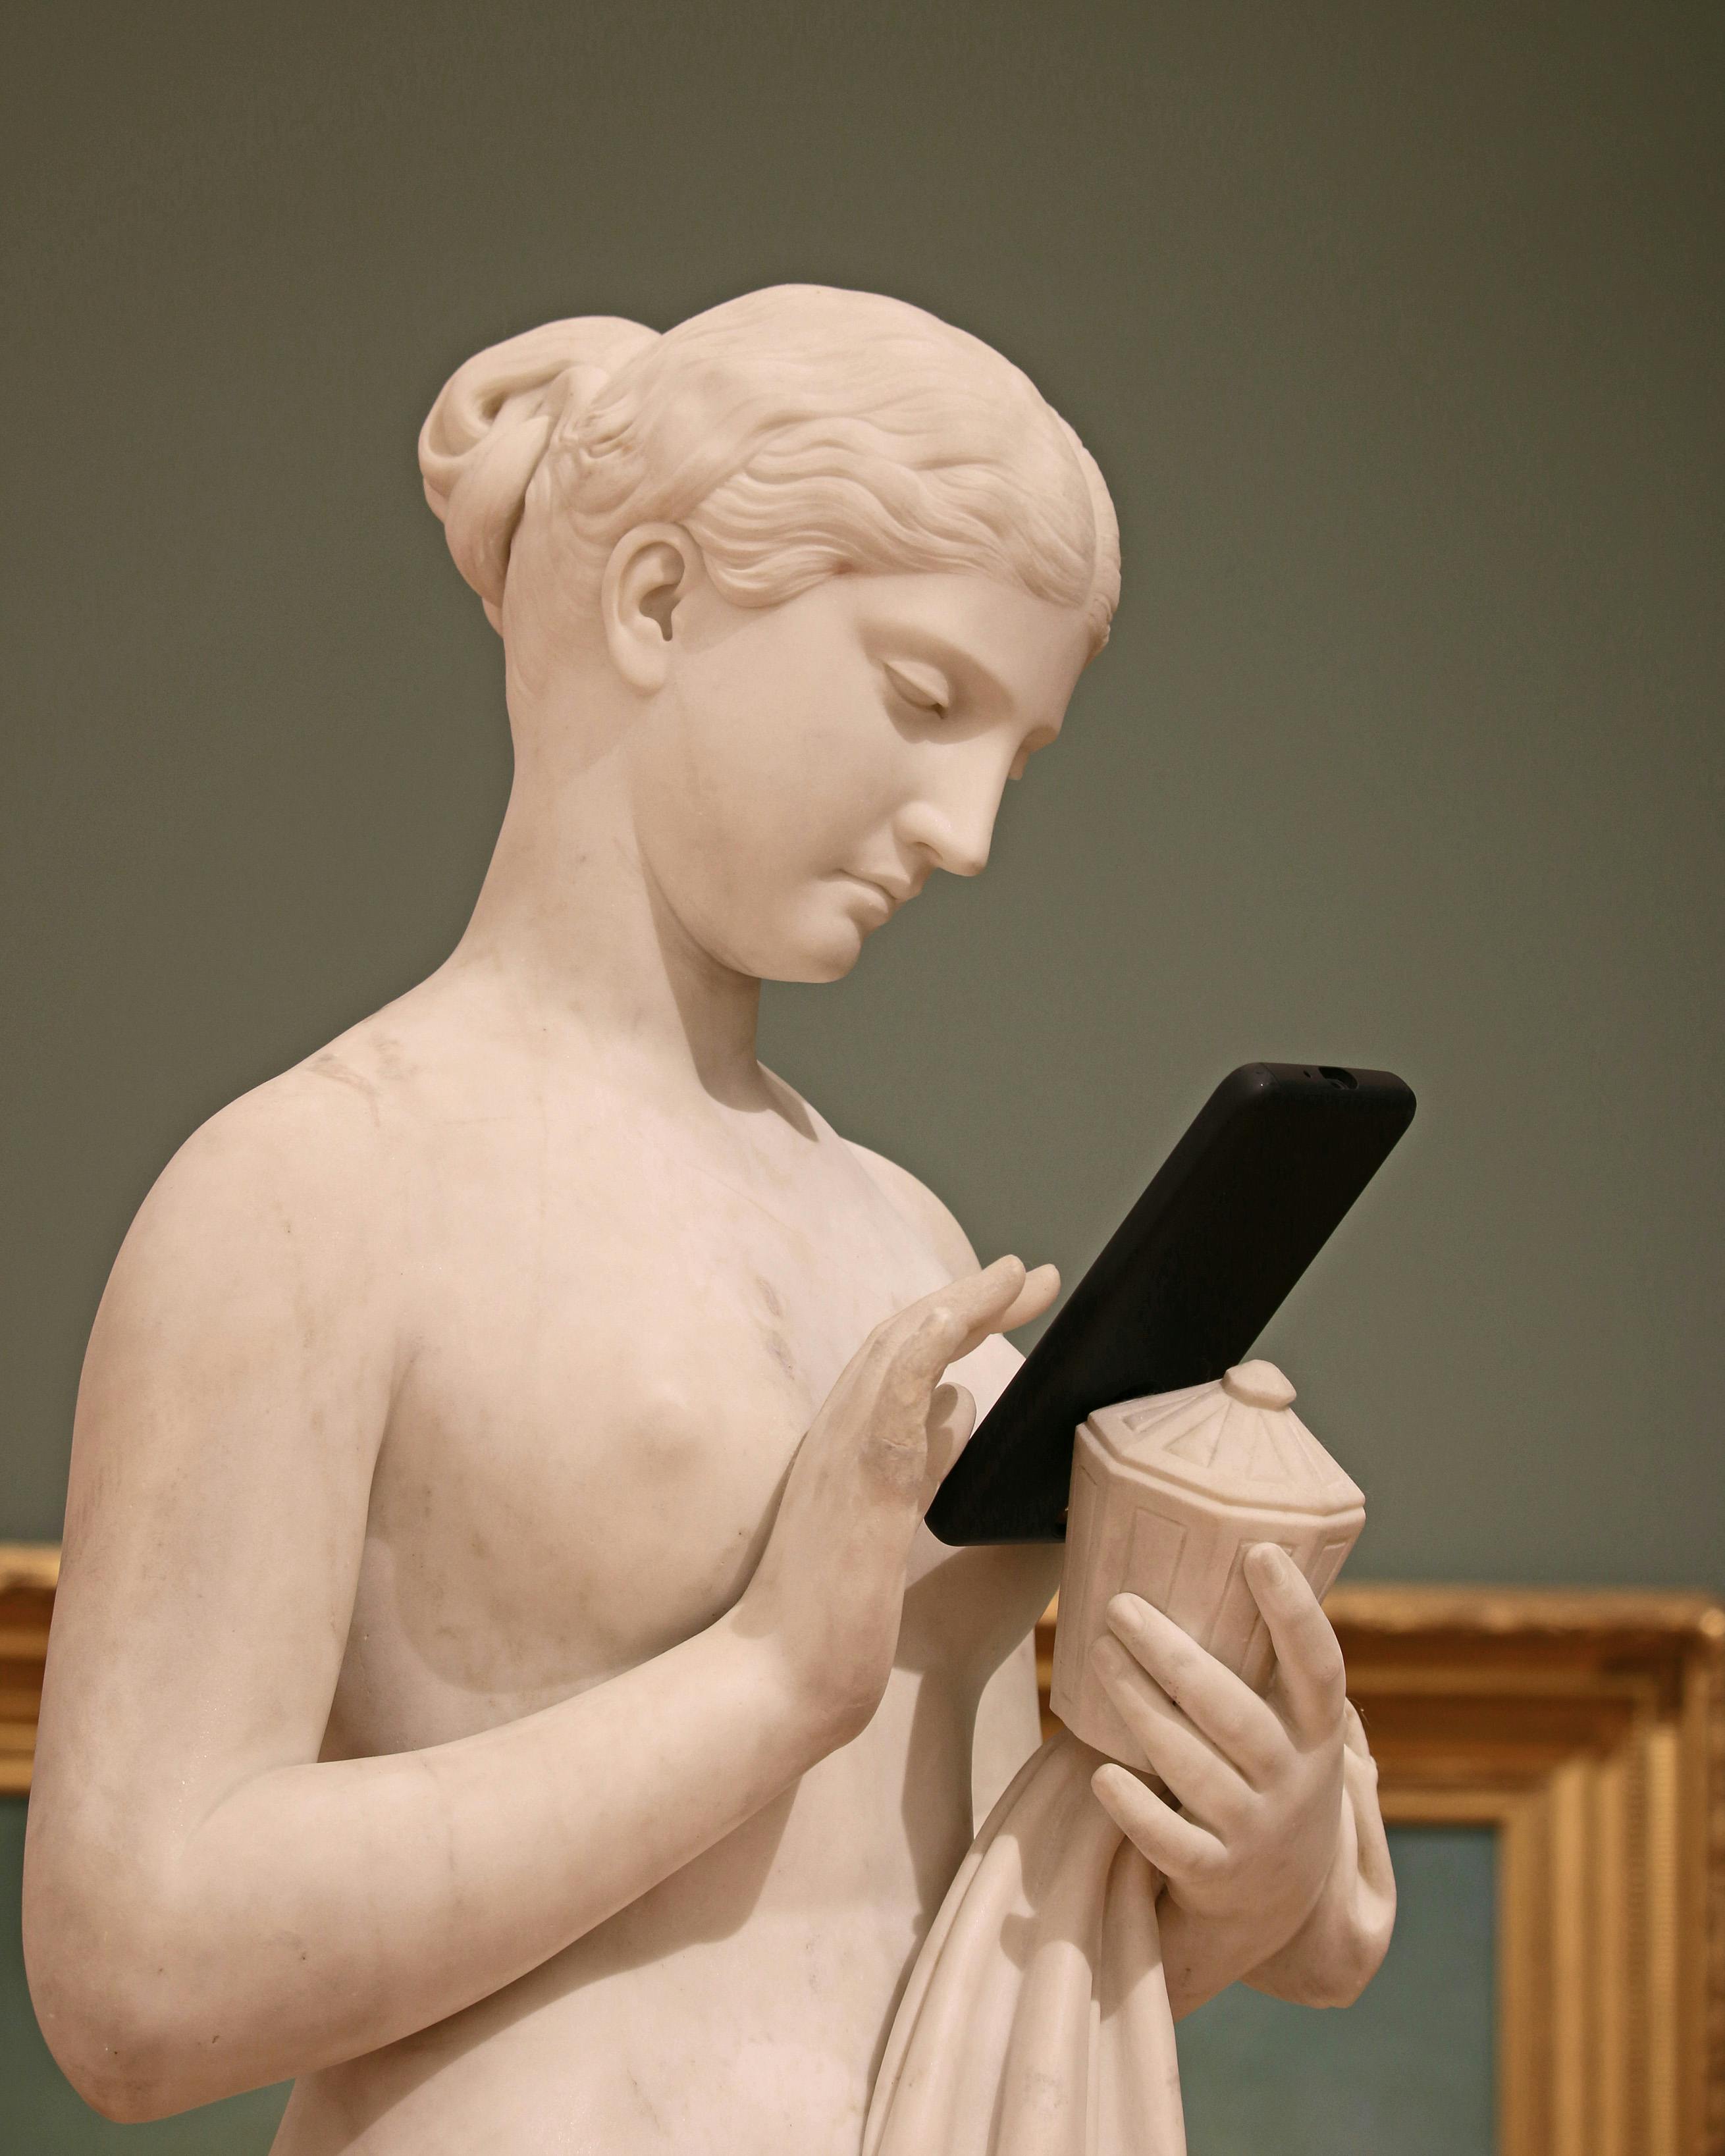 classic female statue surfing internet on smartphone in museum